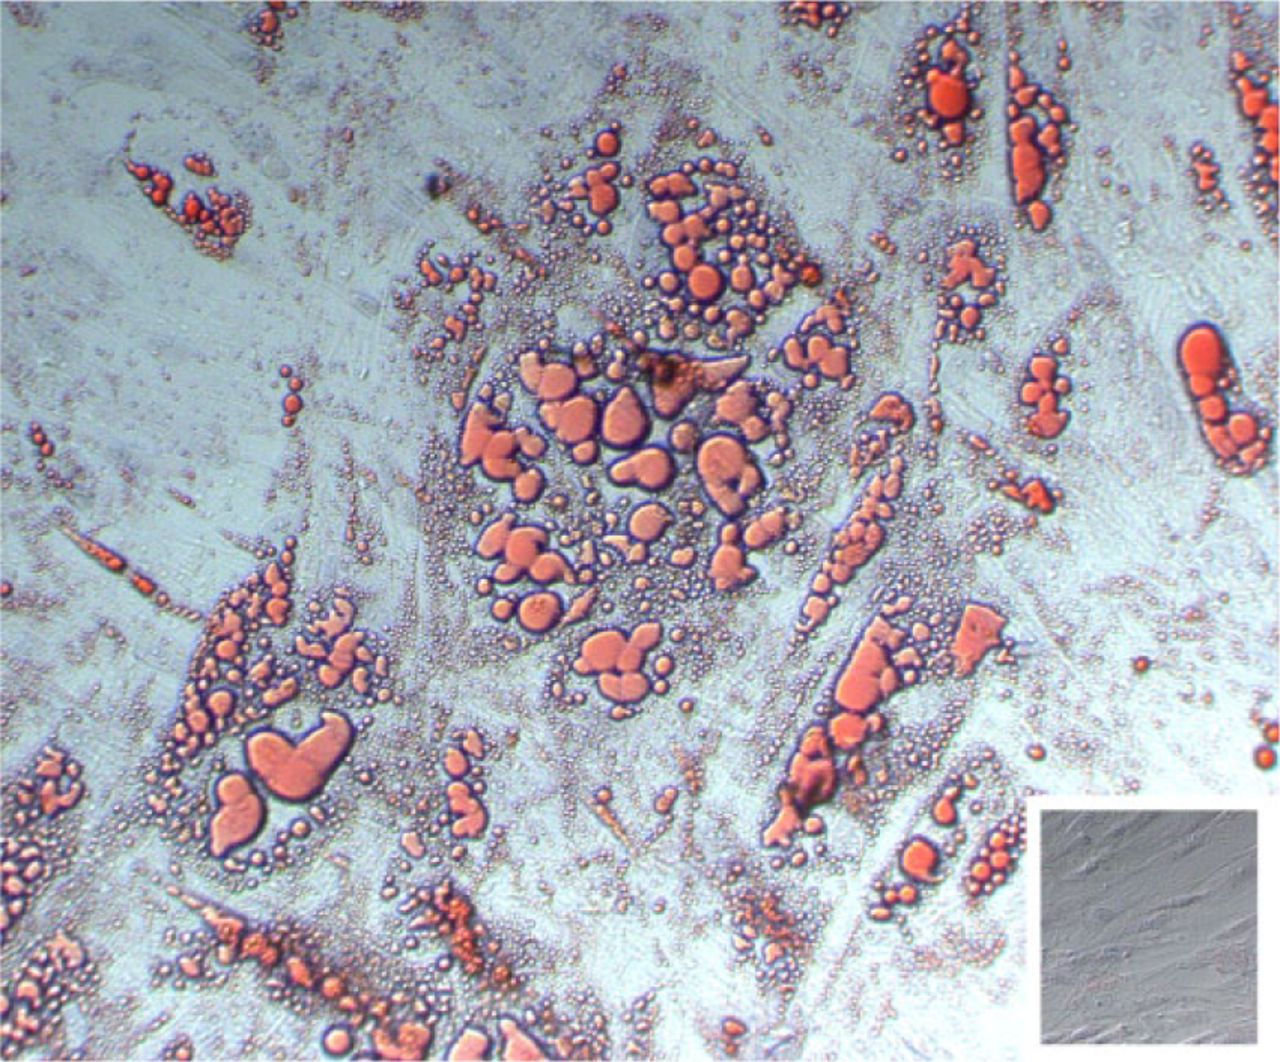 Fig. 8 
            Biomembrane cells cultured for adipogenesis show the presence of fat droplets (stained red in the micrograph). Insert lower right shows that biomembrane cells cultured in control media showed no presence of fat droplets (original magnification ×200).
          